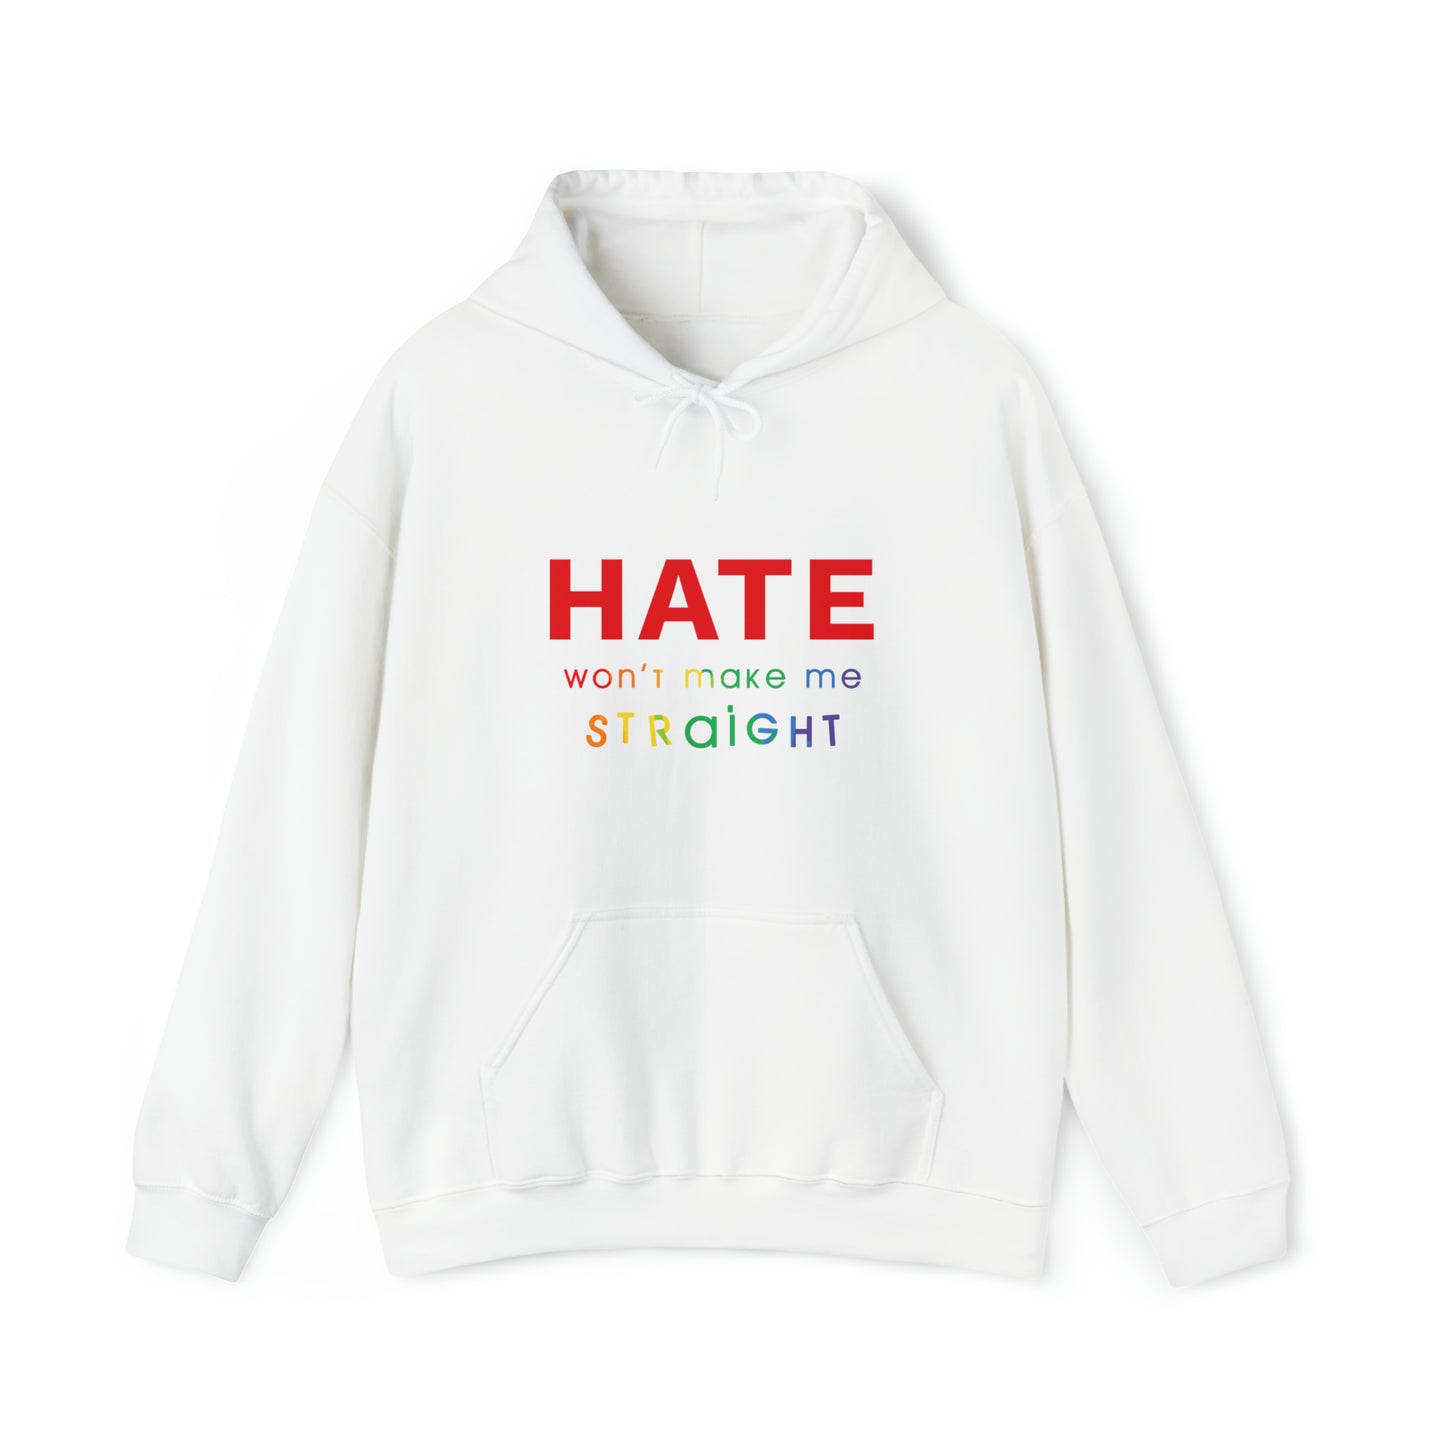 Your Hate Won't Make Me Straight Unisex Heavy Blend™ Hooded Sweatshirt - Queer We Are Shop